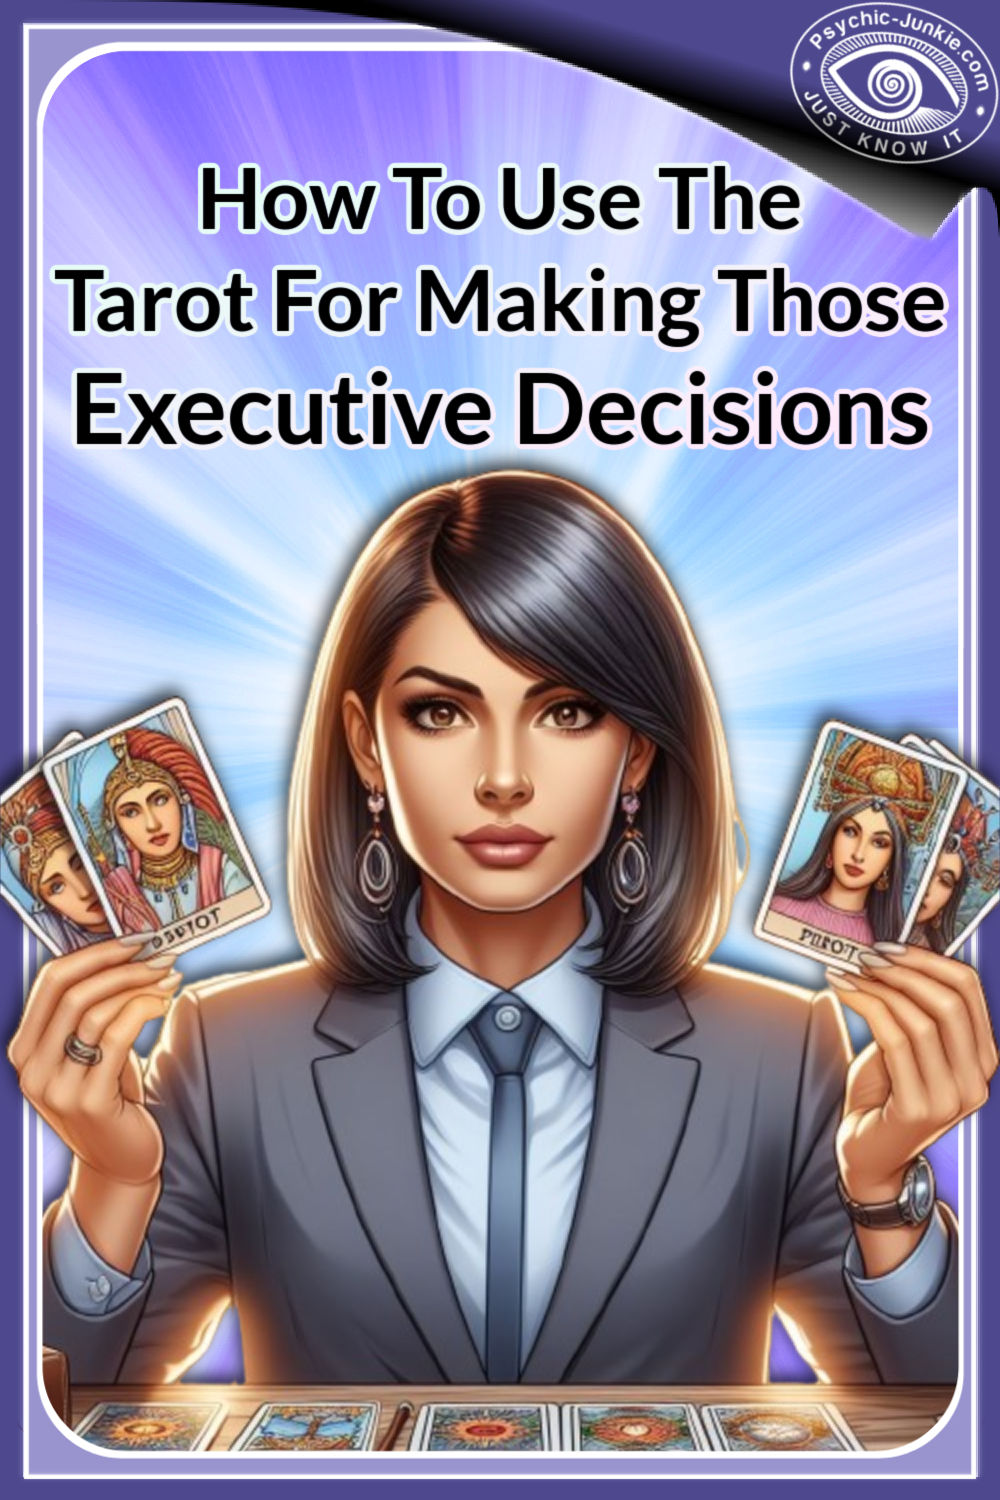 How To Use The Tarot For Making Executive Decisions